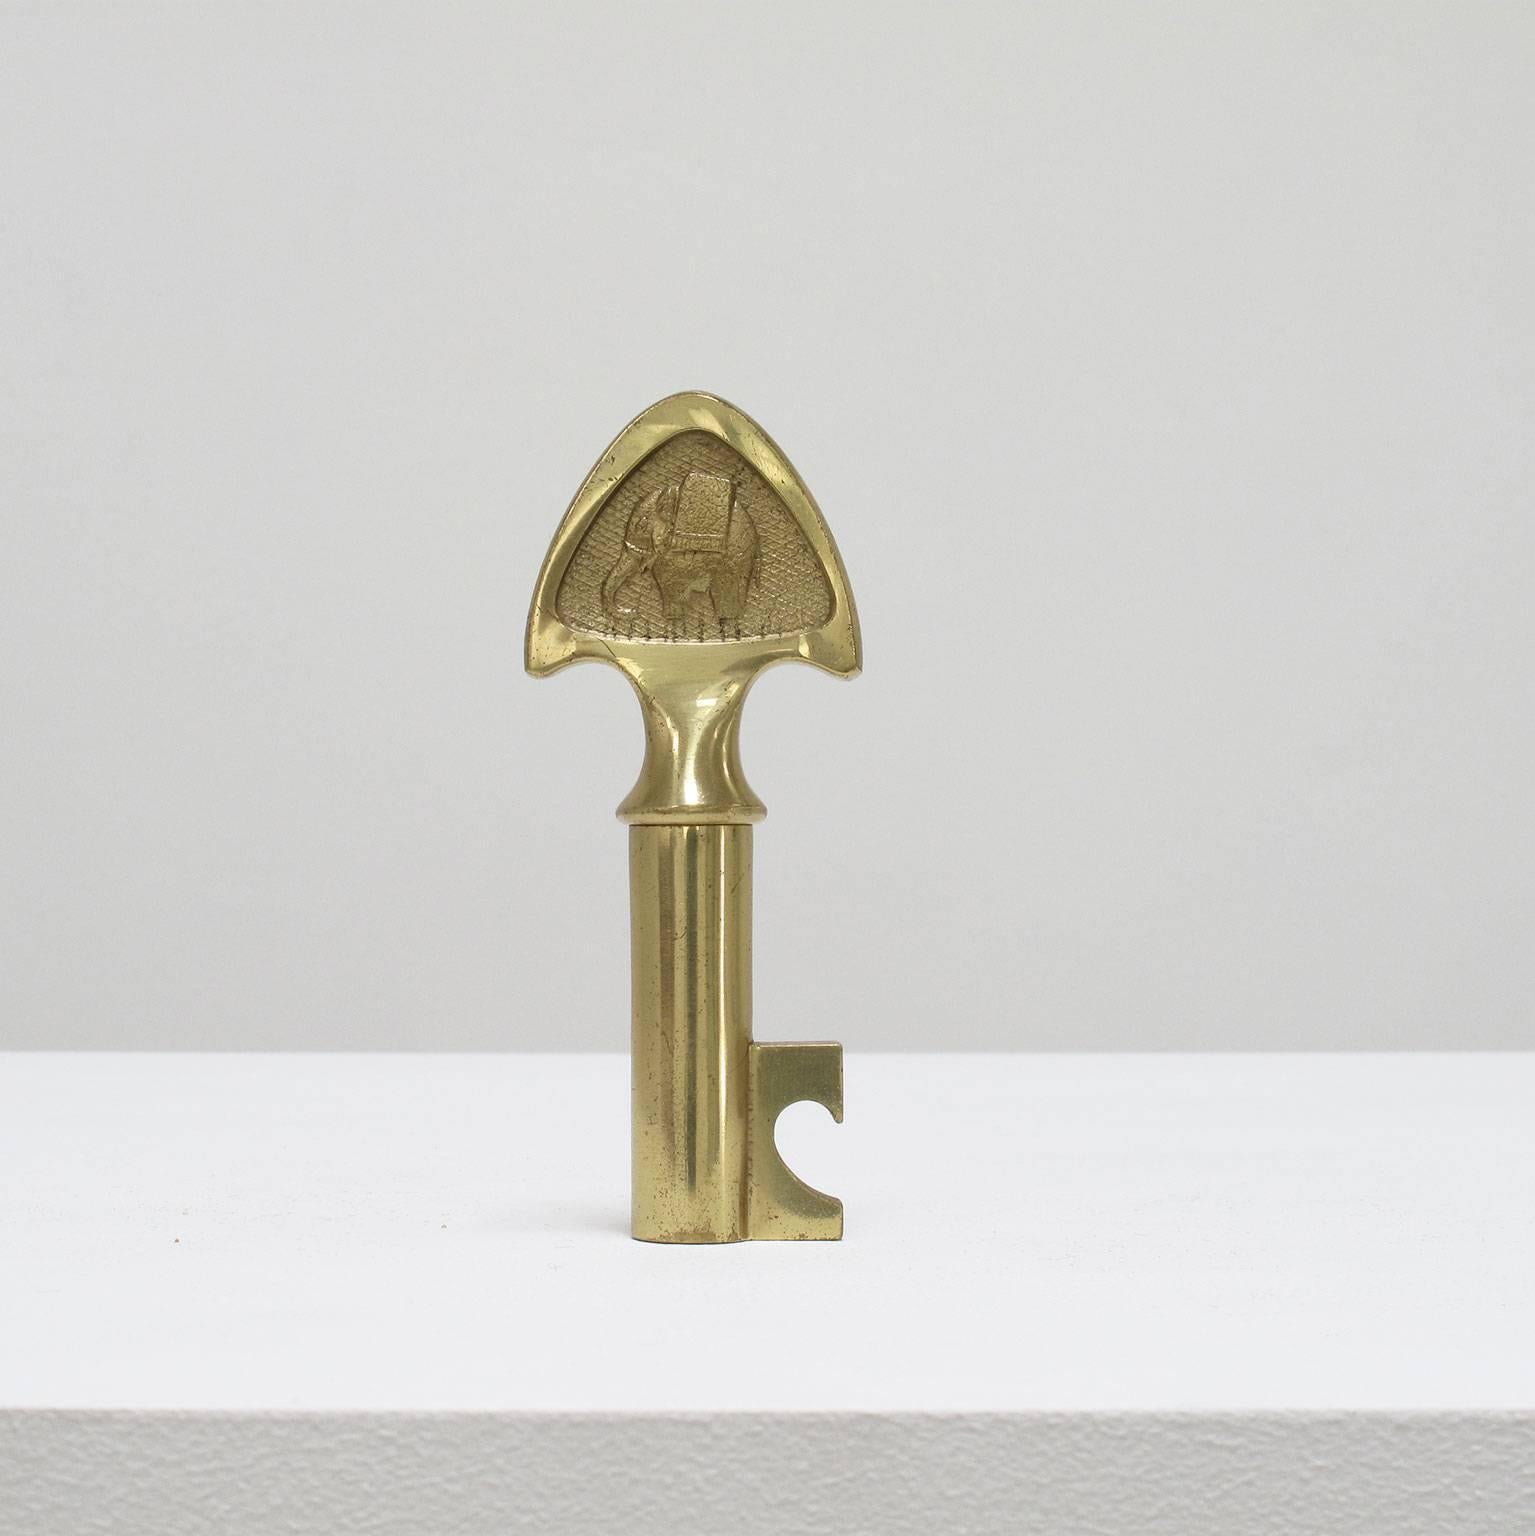 Carl Auböck design object, 1950s, modernist decorative and functional solid brass bar tool with bottle opener and hidden corkscrew, decorated with an elephant on one side, signed, Austria, Werkstätte Auböck, 4 1/2 high x 1 3/4 wide x 5/8 deep
